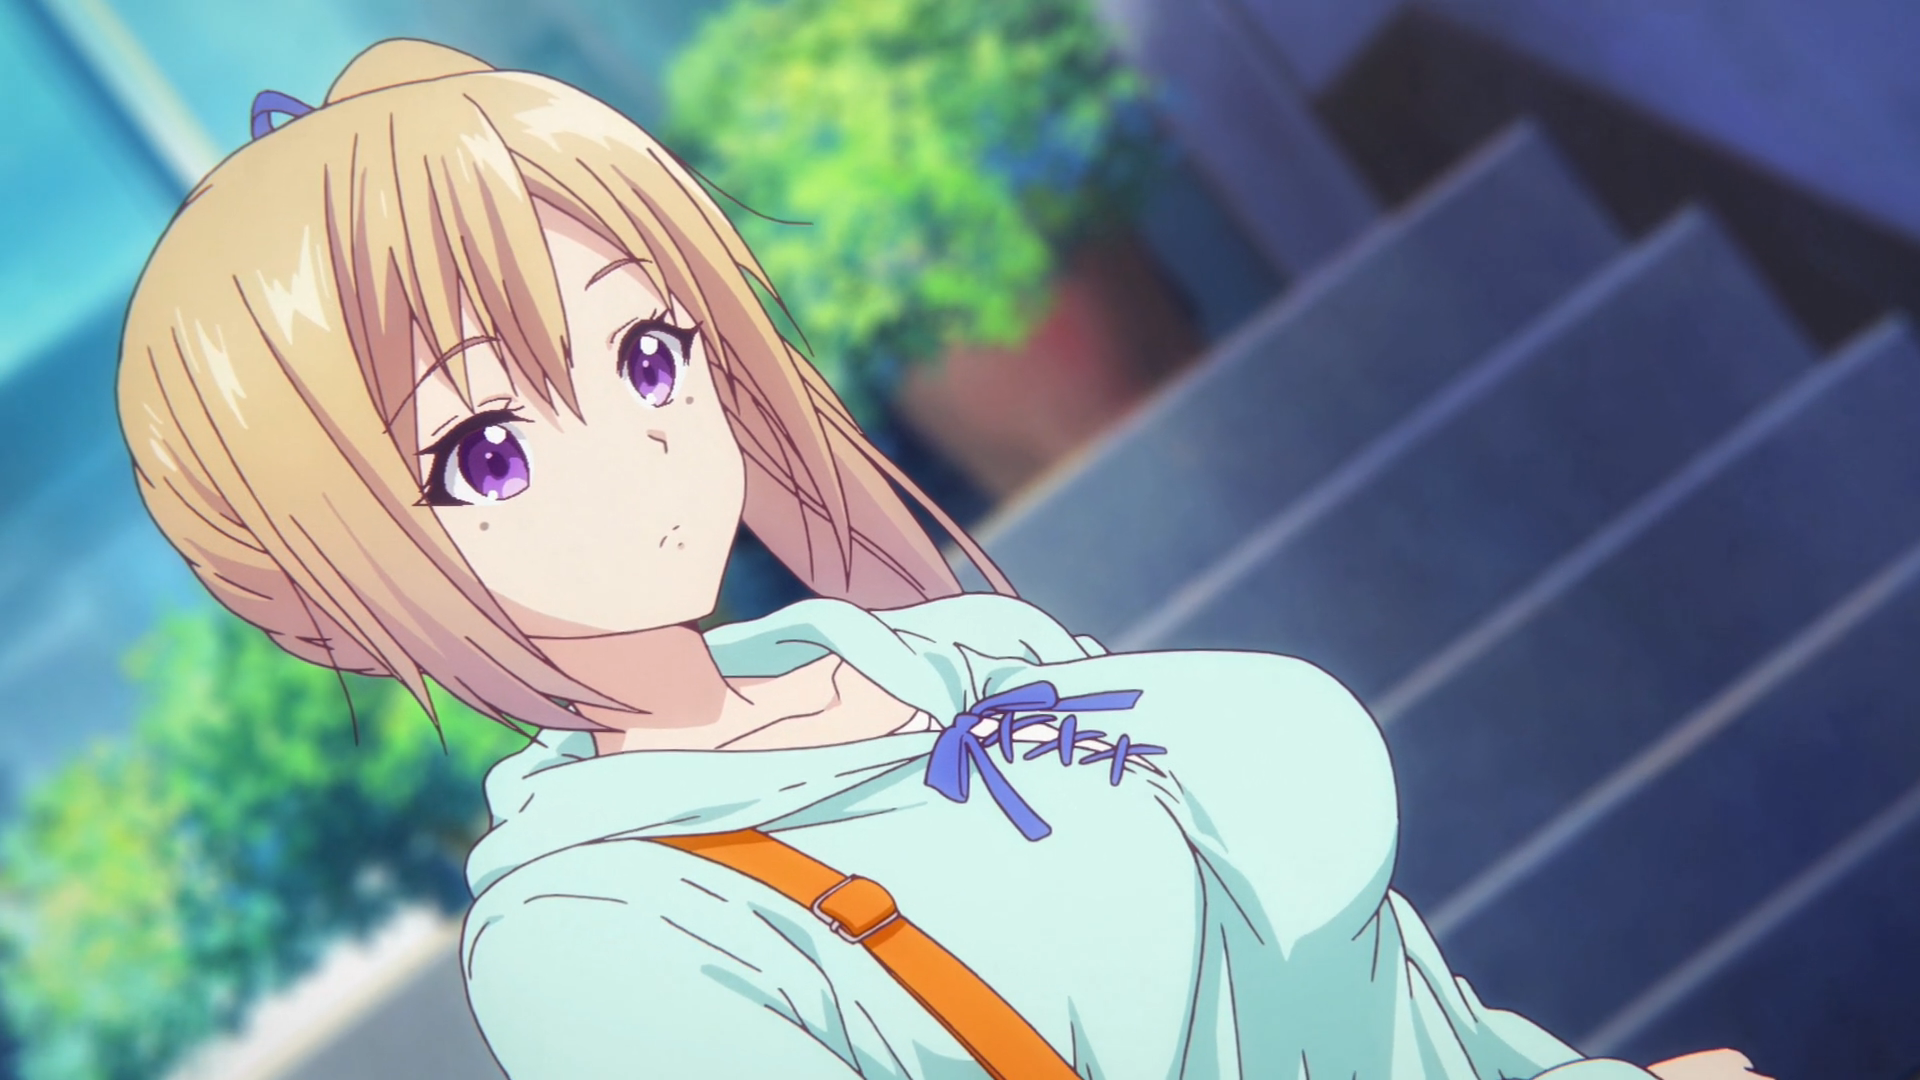 Review/discussion about: Musaigen no Phantom World The Chuuni Corner.